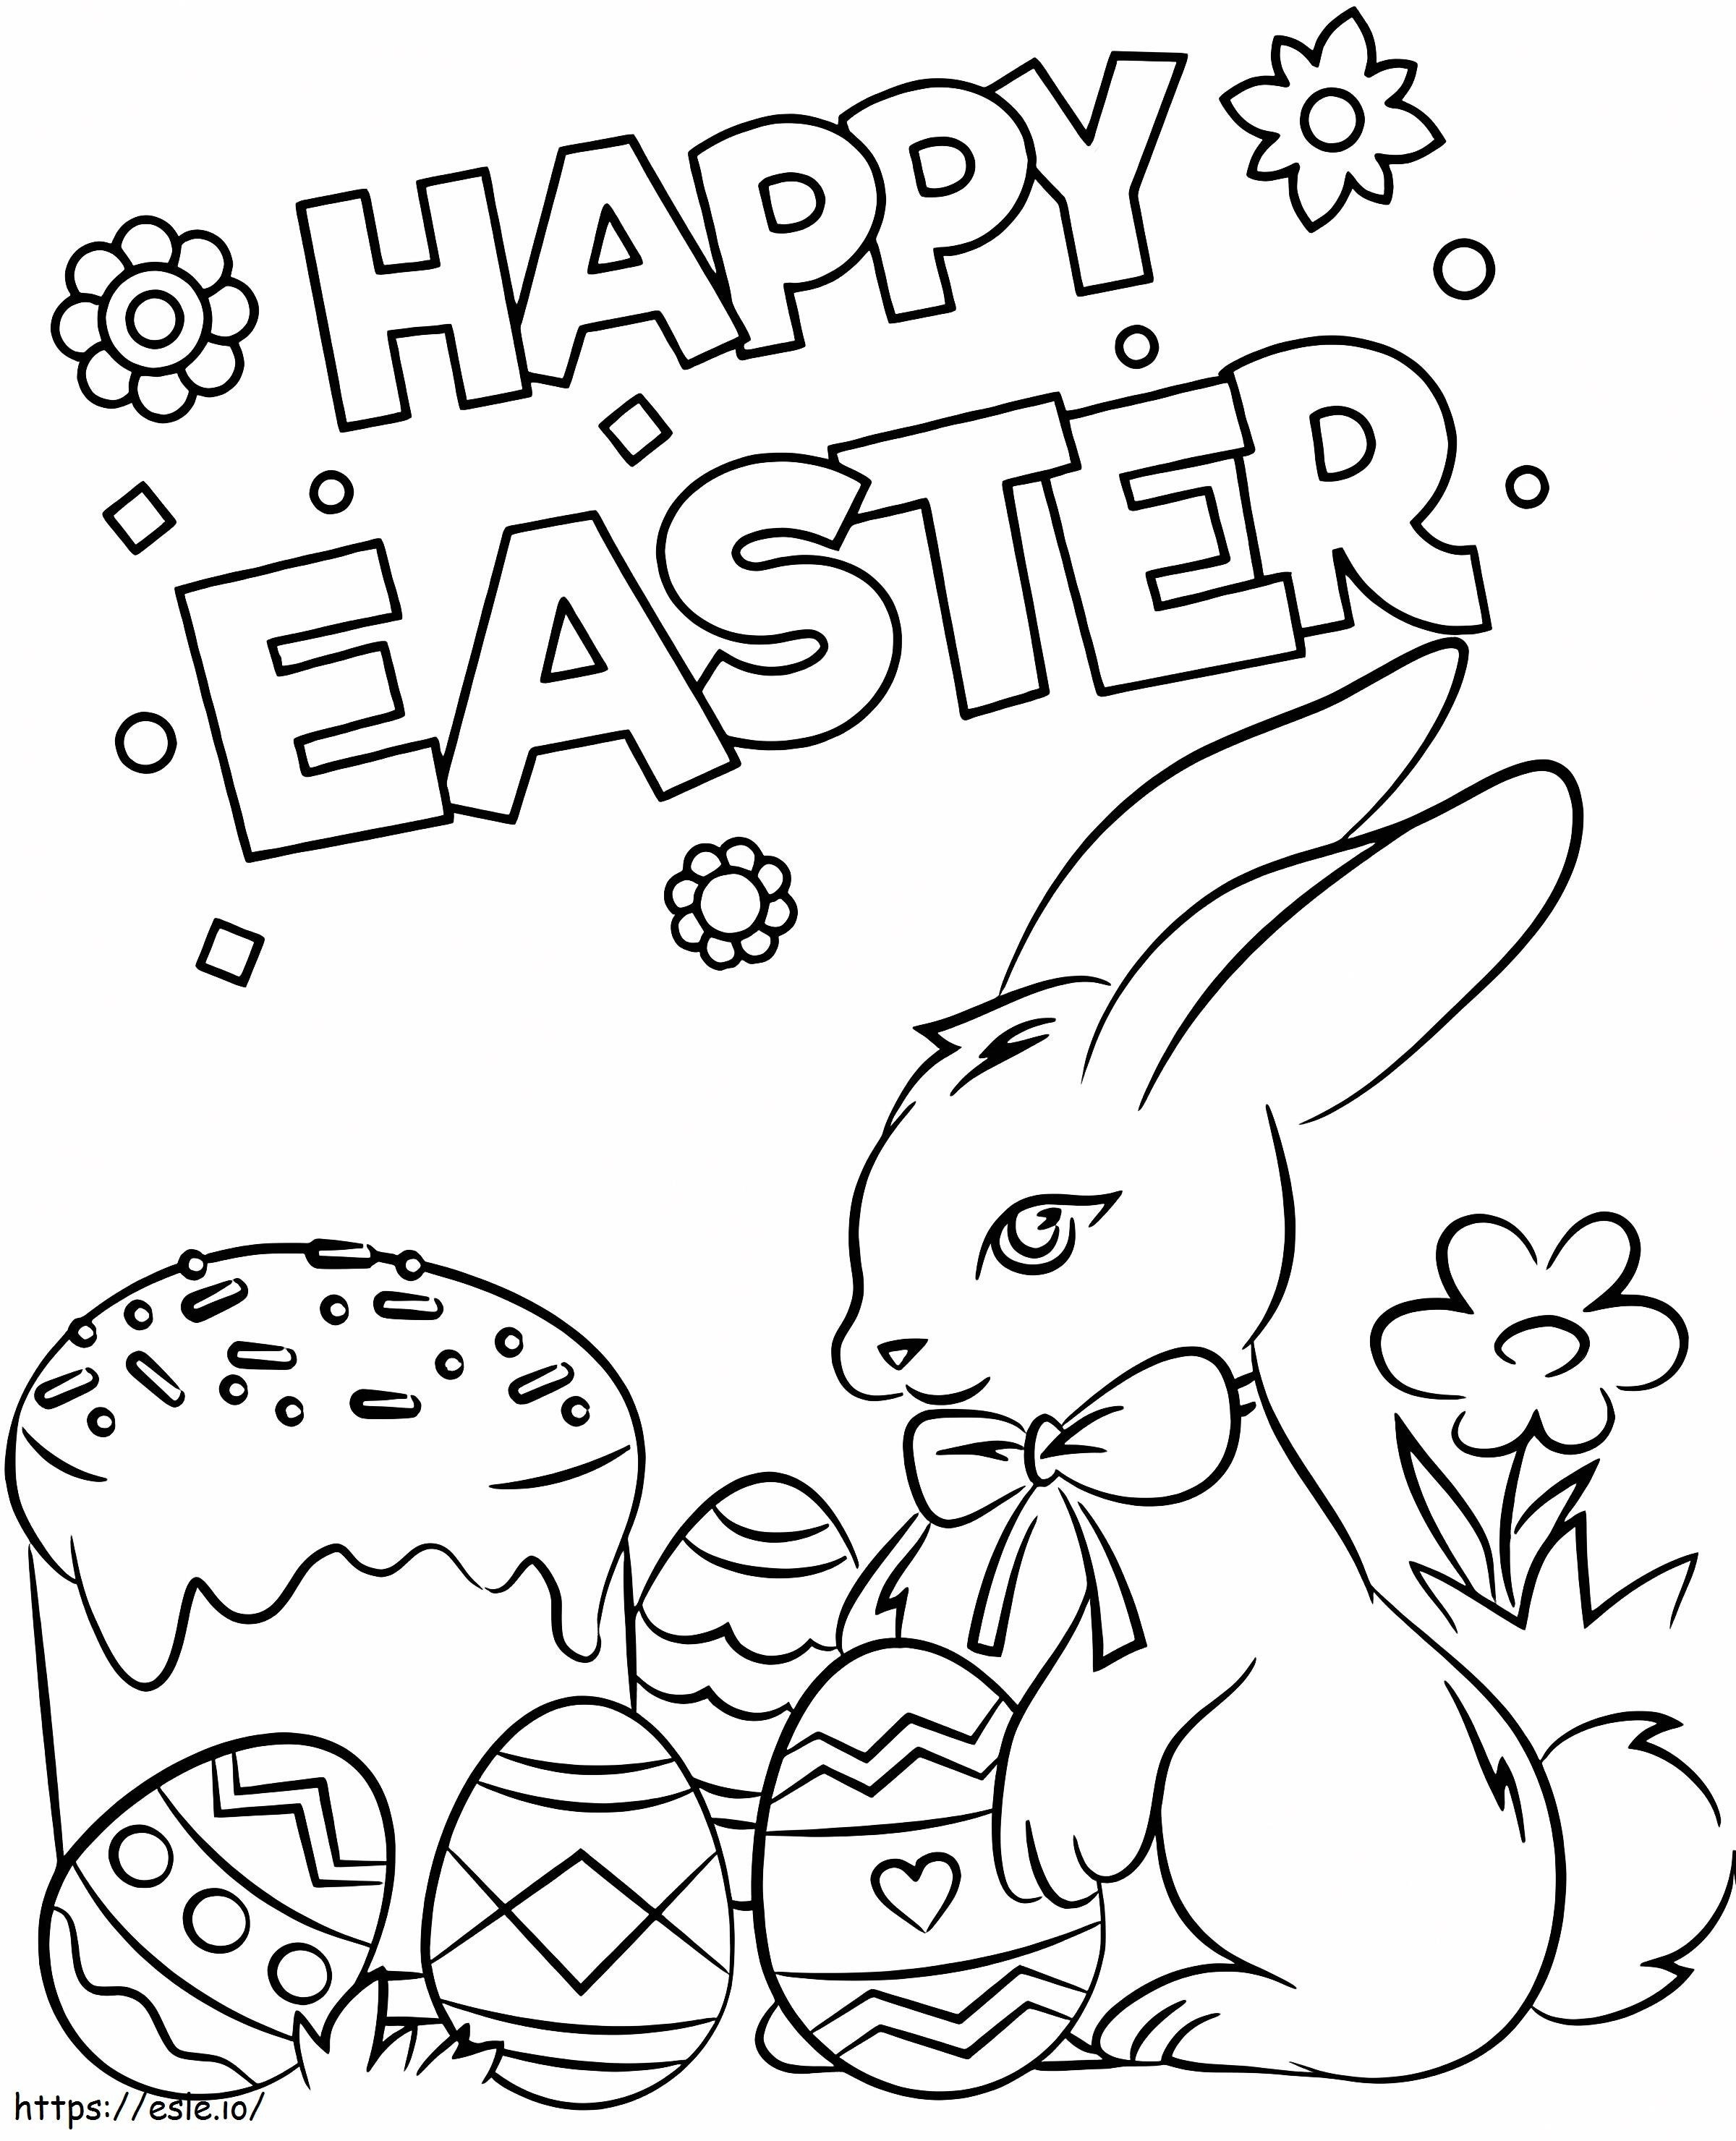 Lovely Happy Easter Card coloring page